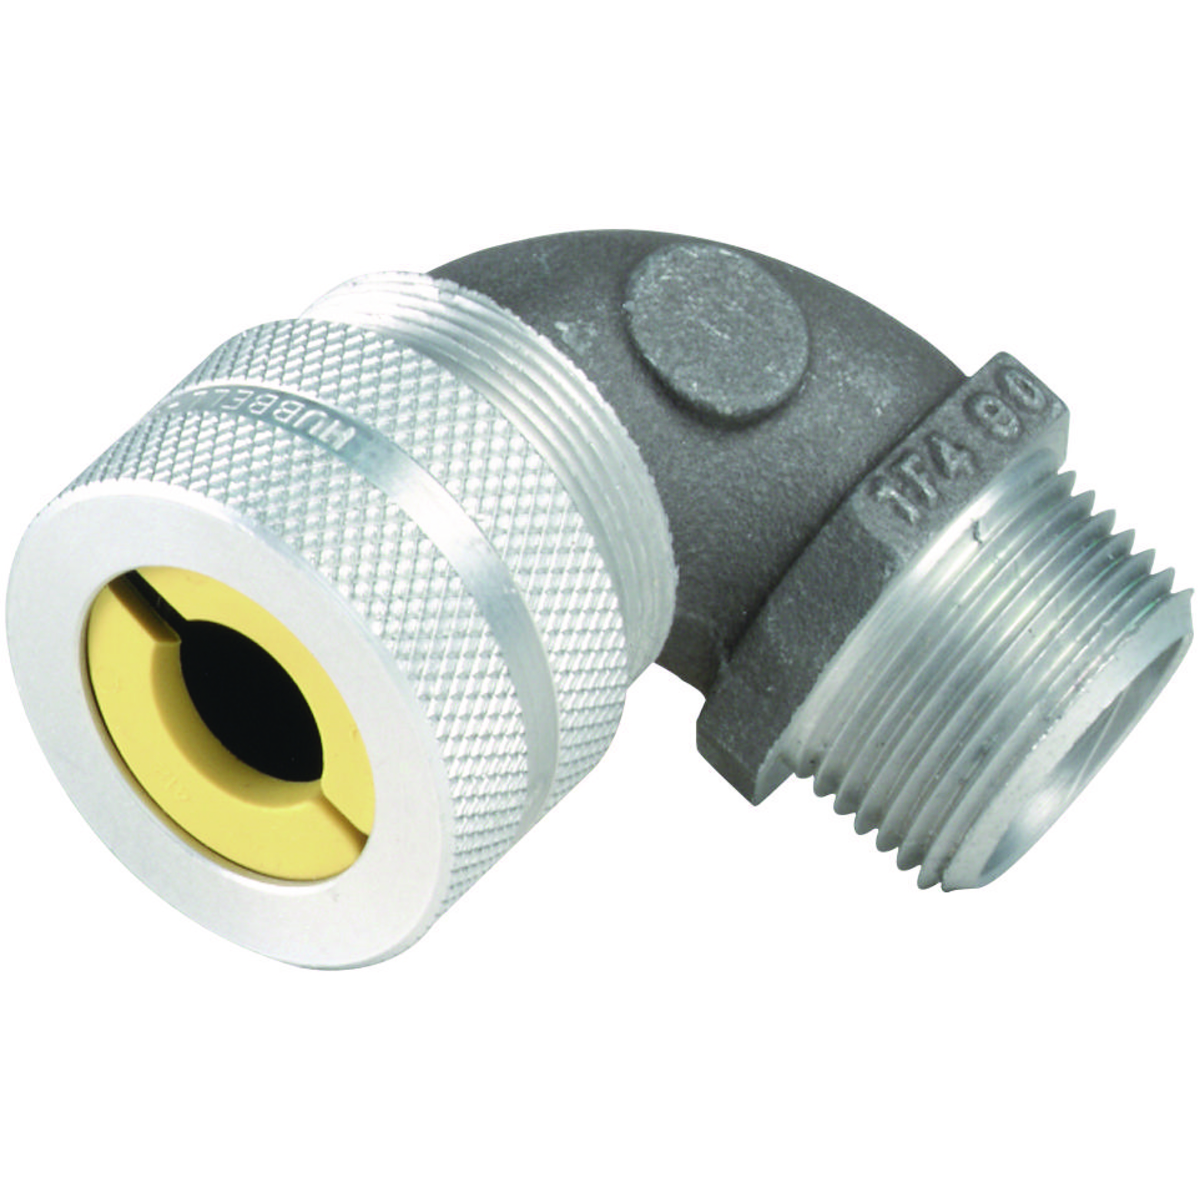 Z SERIES - ALUMINUM INCREASED SAFETY 90-DEGREE CORD CONNECTOR - YELLOWCORD RANGE 0.625 TO 0.750 - HUB SIZE 3/4 INCH NPT